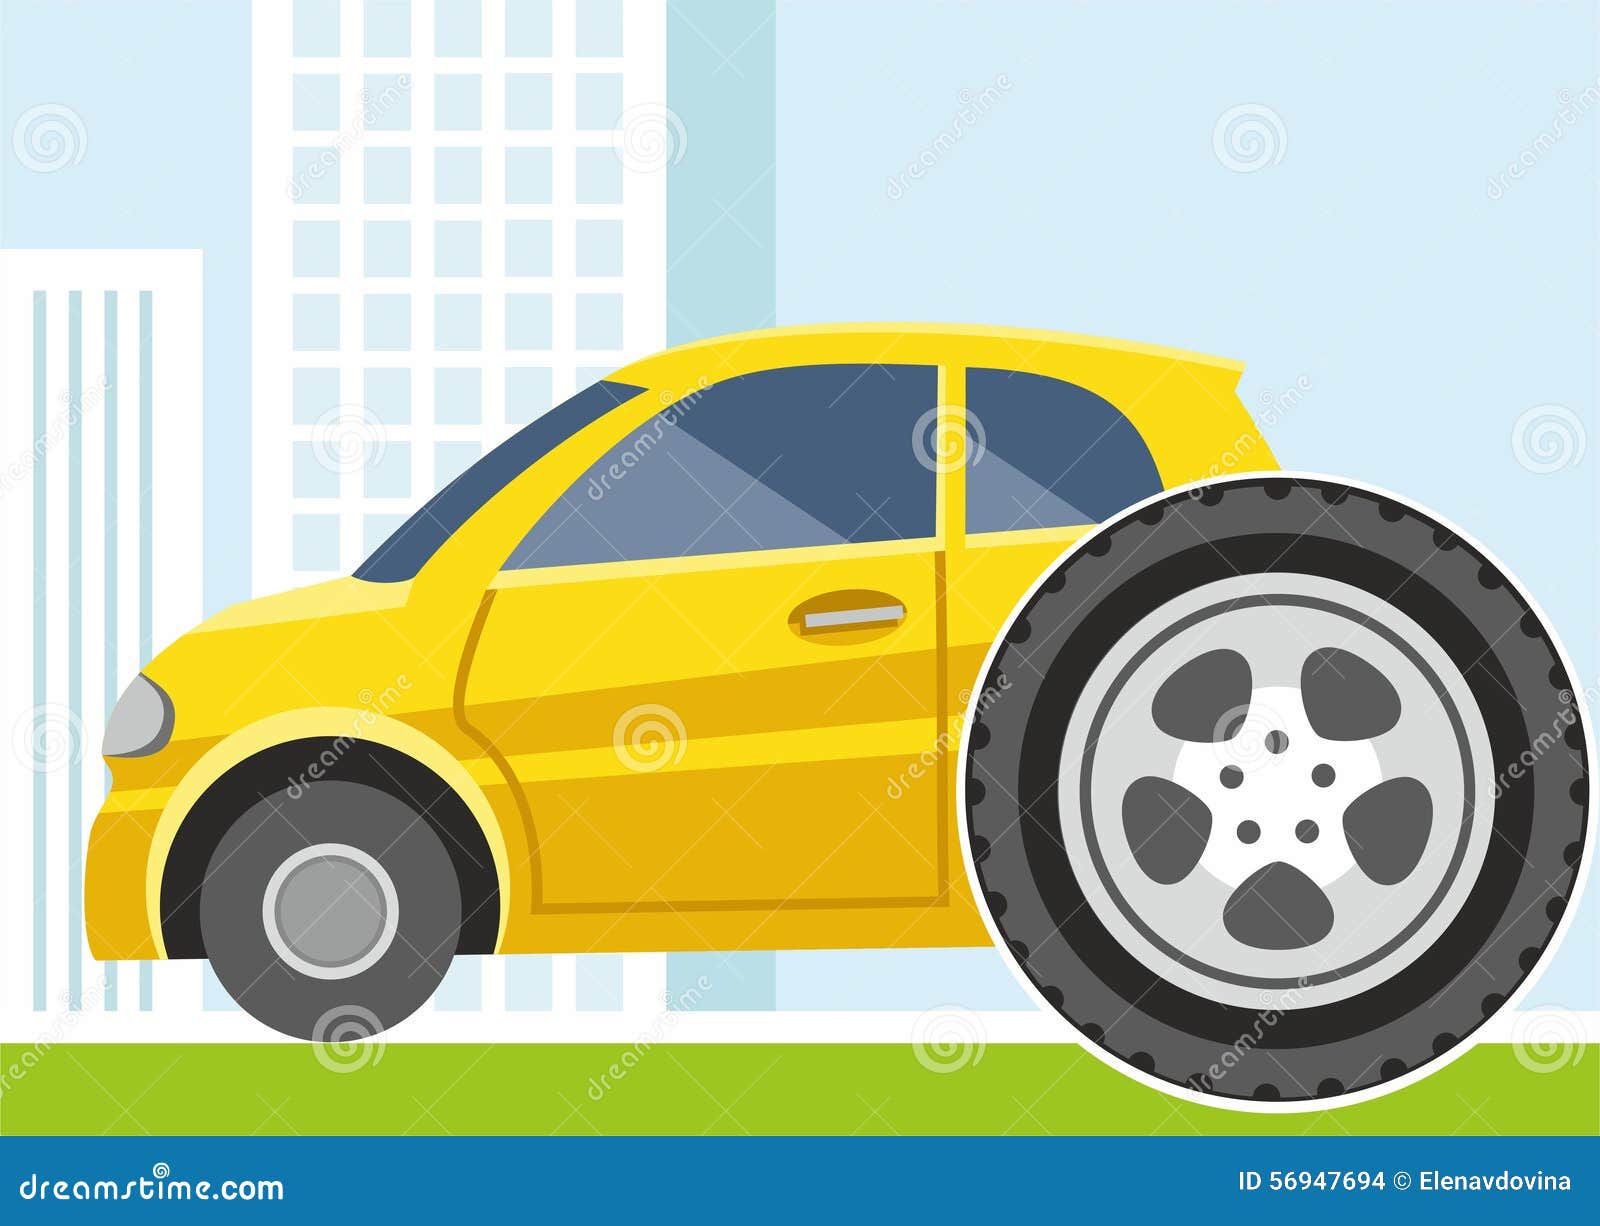 Car, replacement of wheels, tyres, colored illustration. On the street, a small yellow car to change the wheel. Colored, flat illustration.